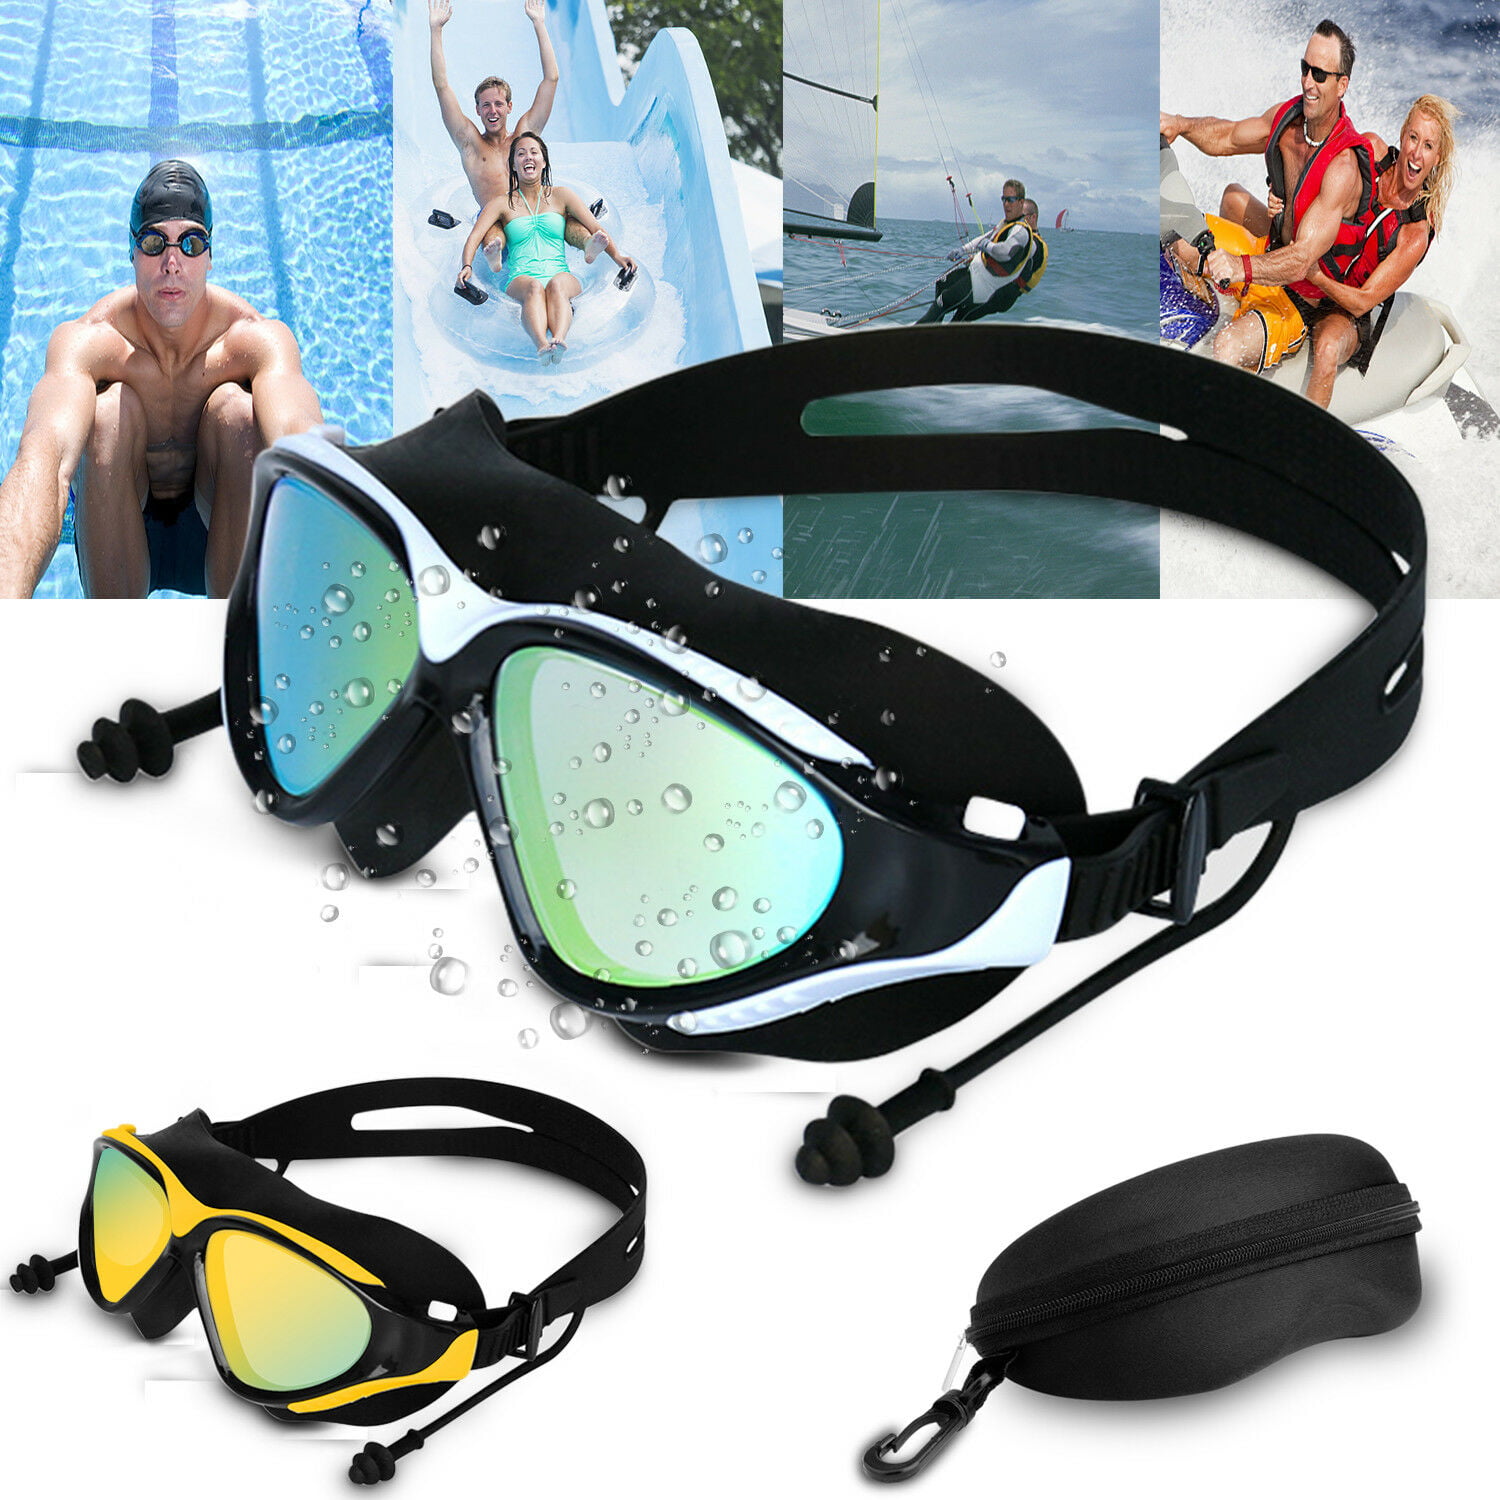 Swimming Goggles Anti Fog UV Protection Adult Swim And Diving Waterproof Glasses 